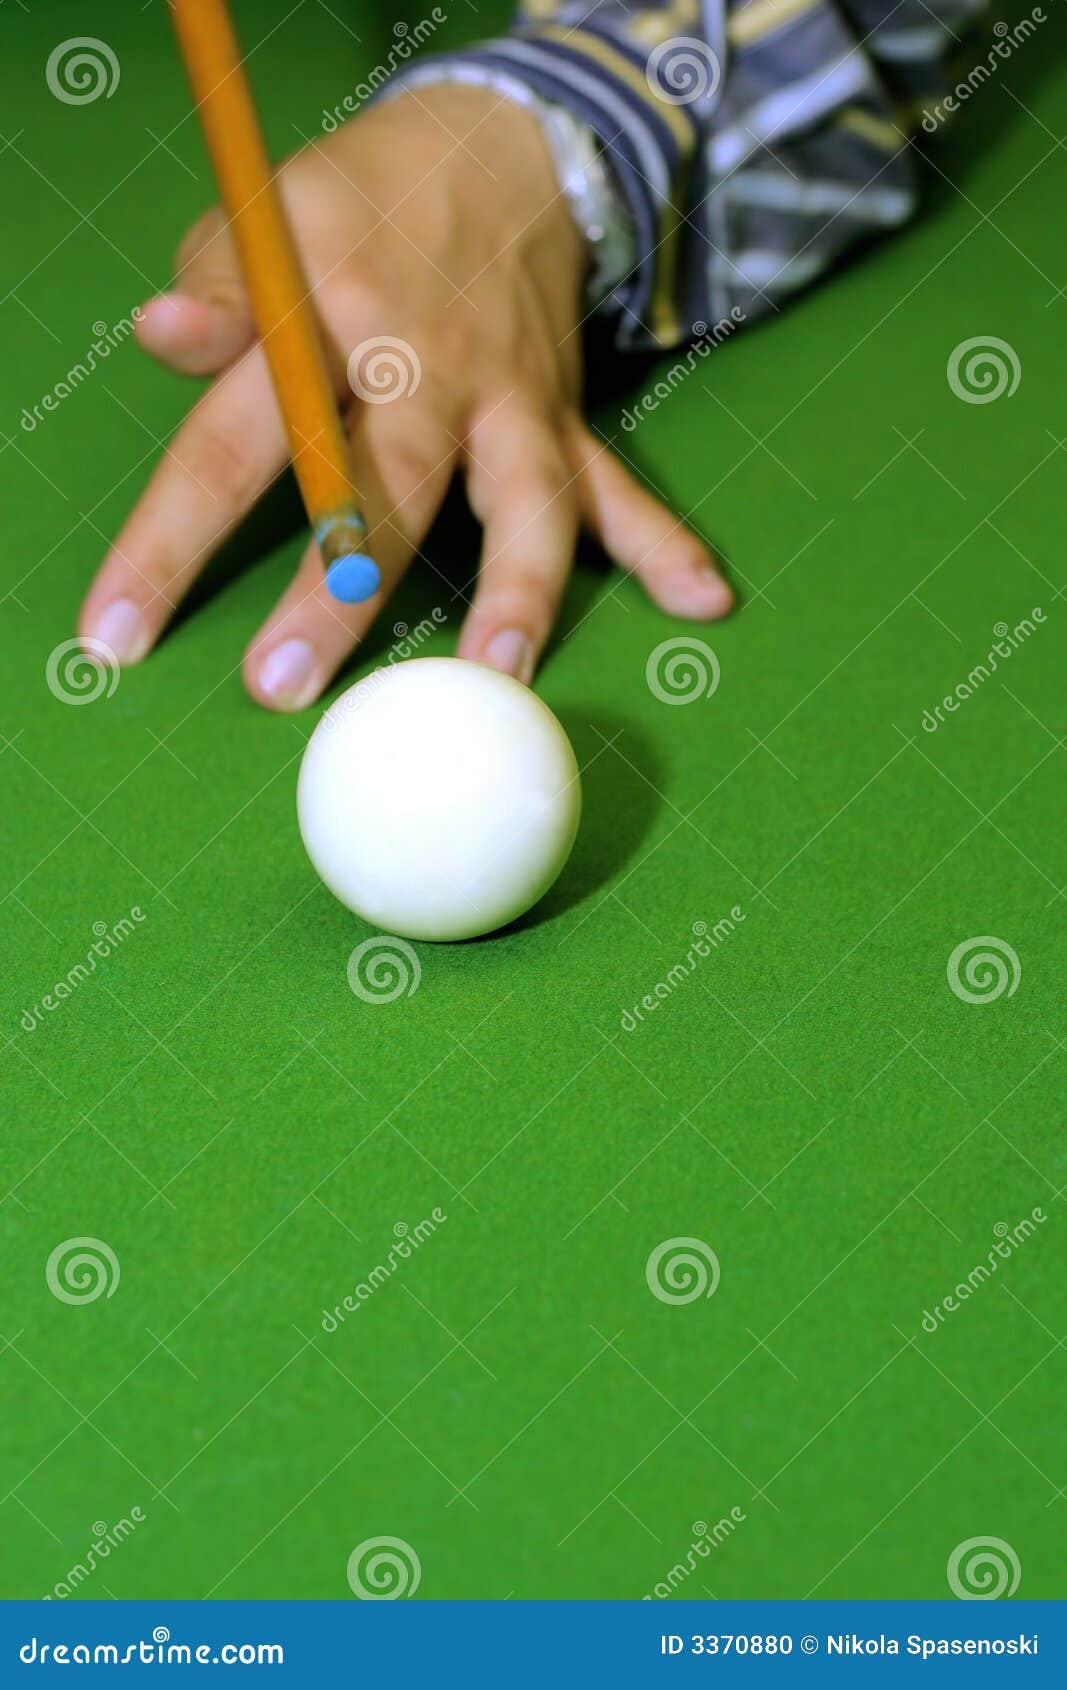 Snooker player stock photo